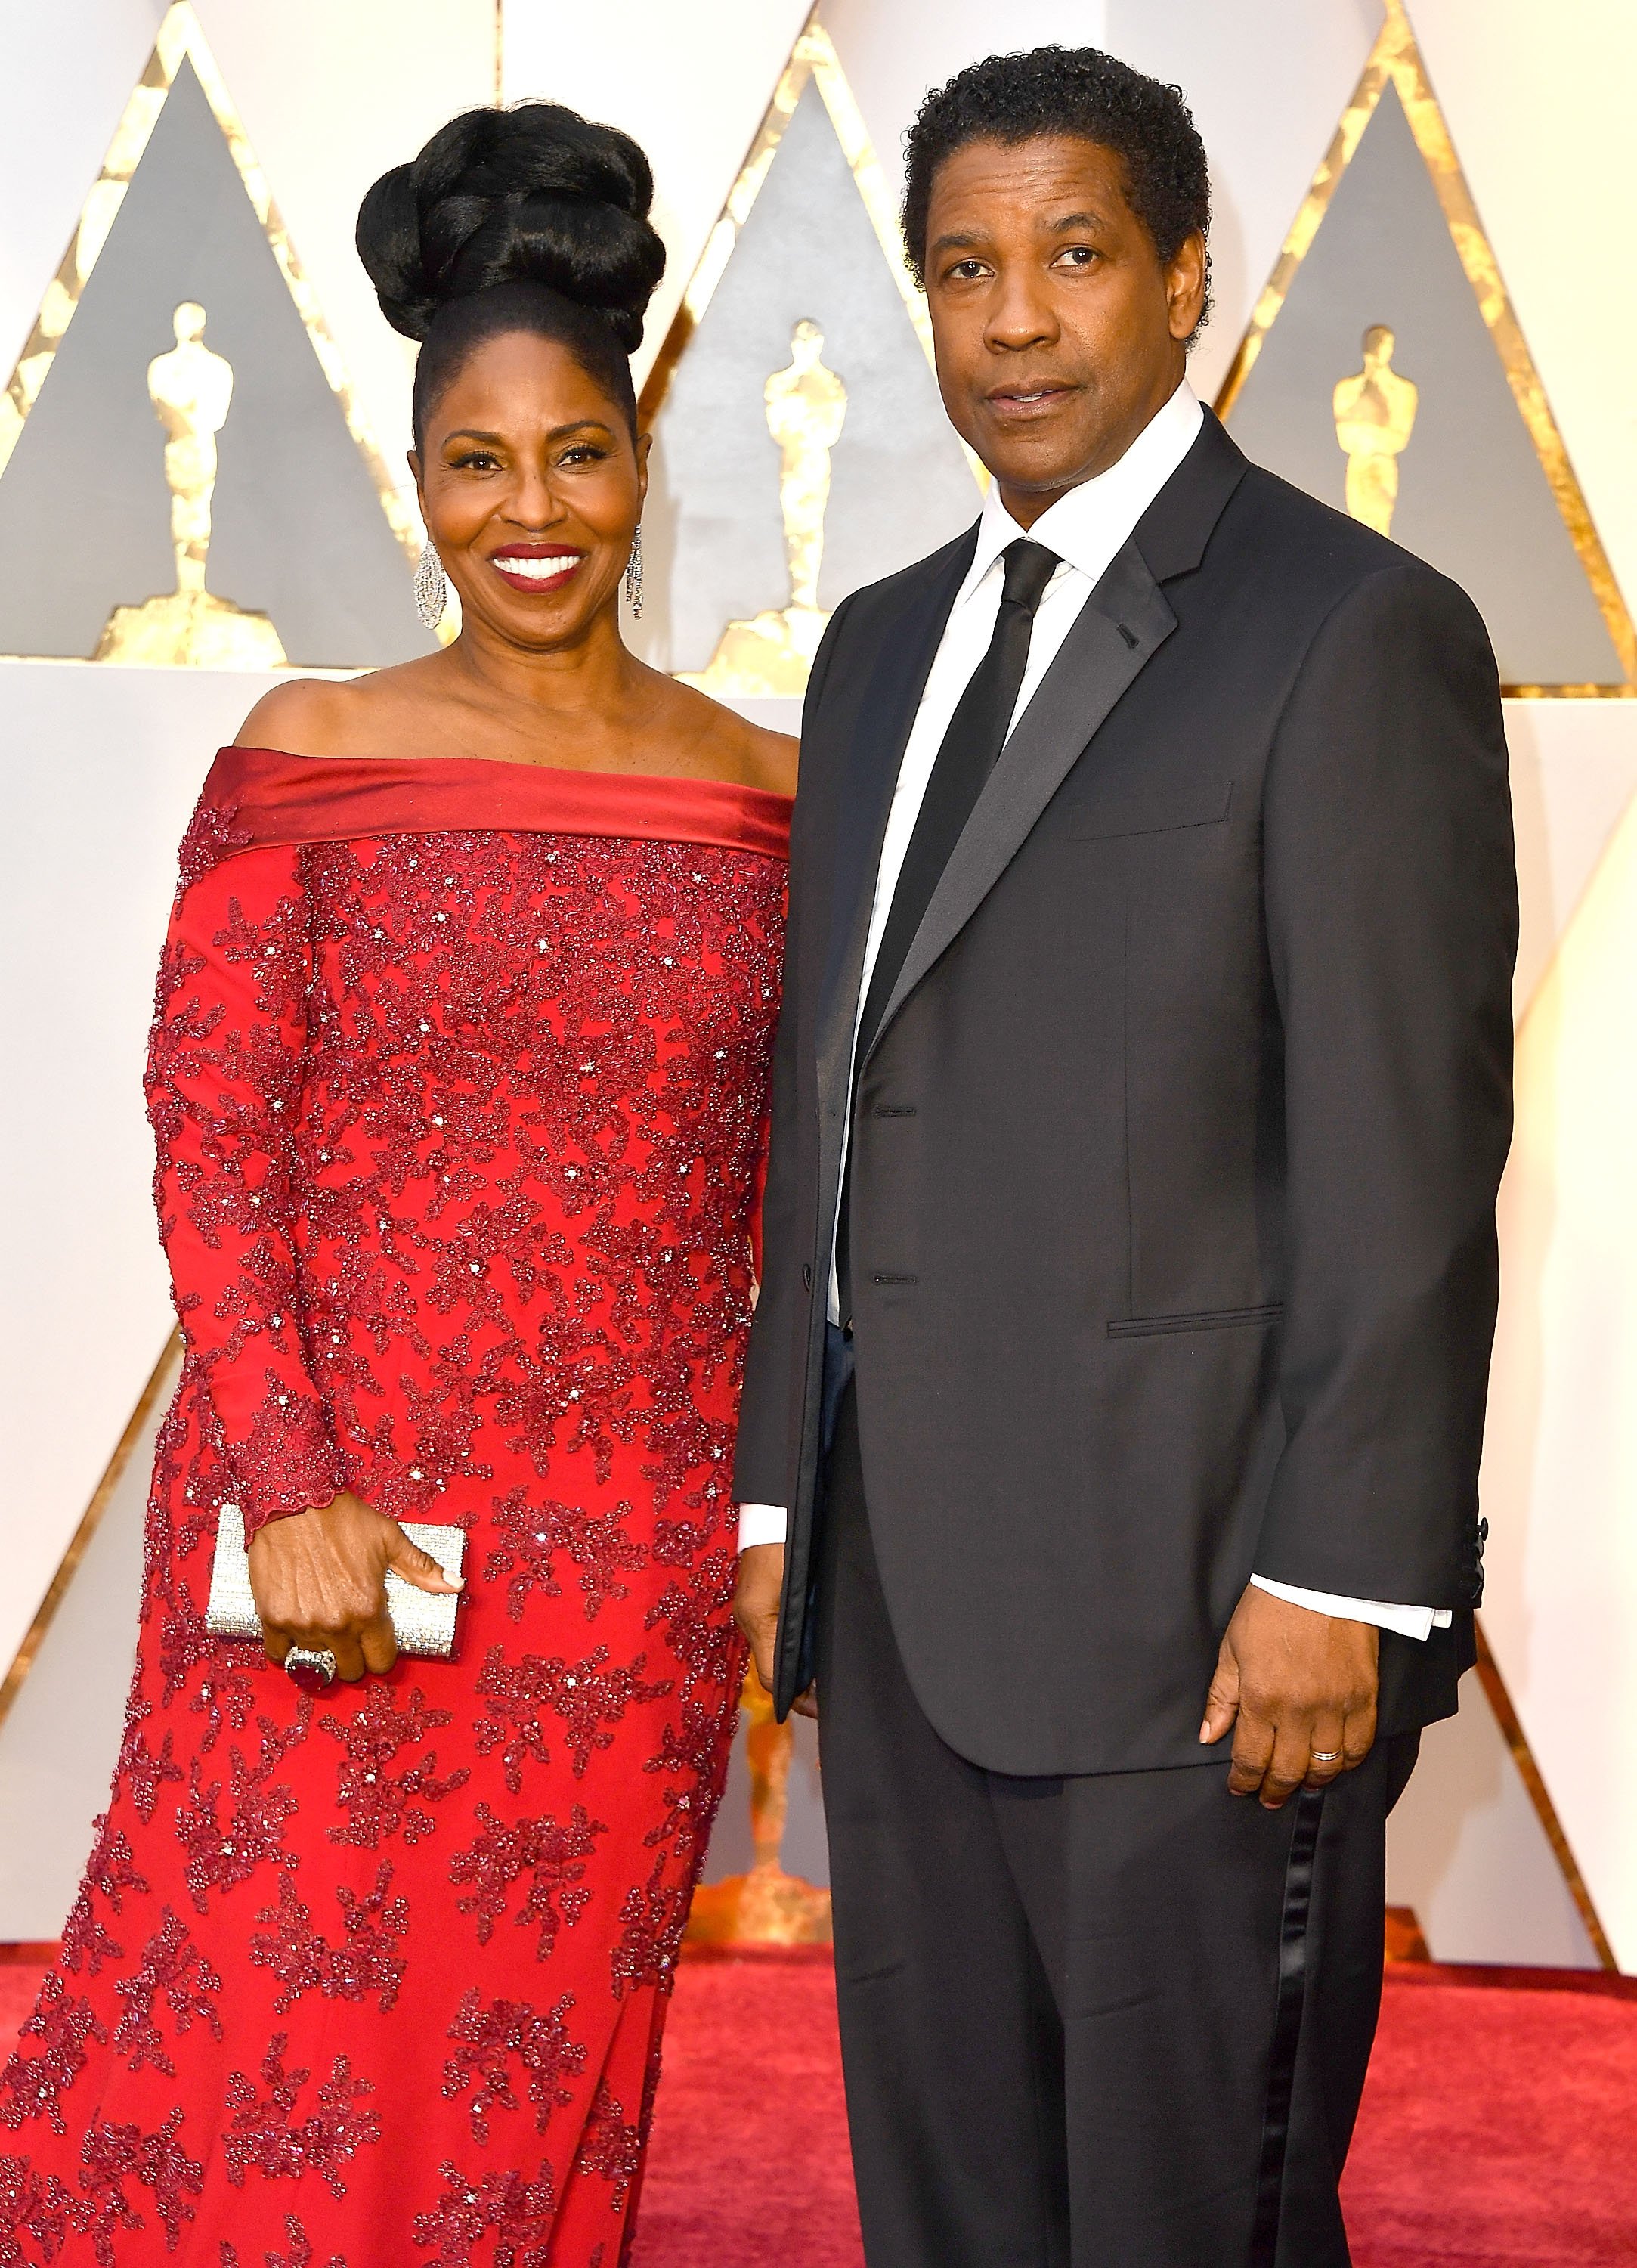 Pauletta Washington and Denzel Washington attends the 89th Annual Academy Awards at Hollywood & Highland Center on February 26, 2017 in Hollywood, California. | Source: Getty Images